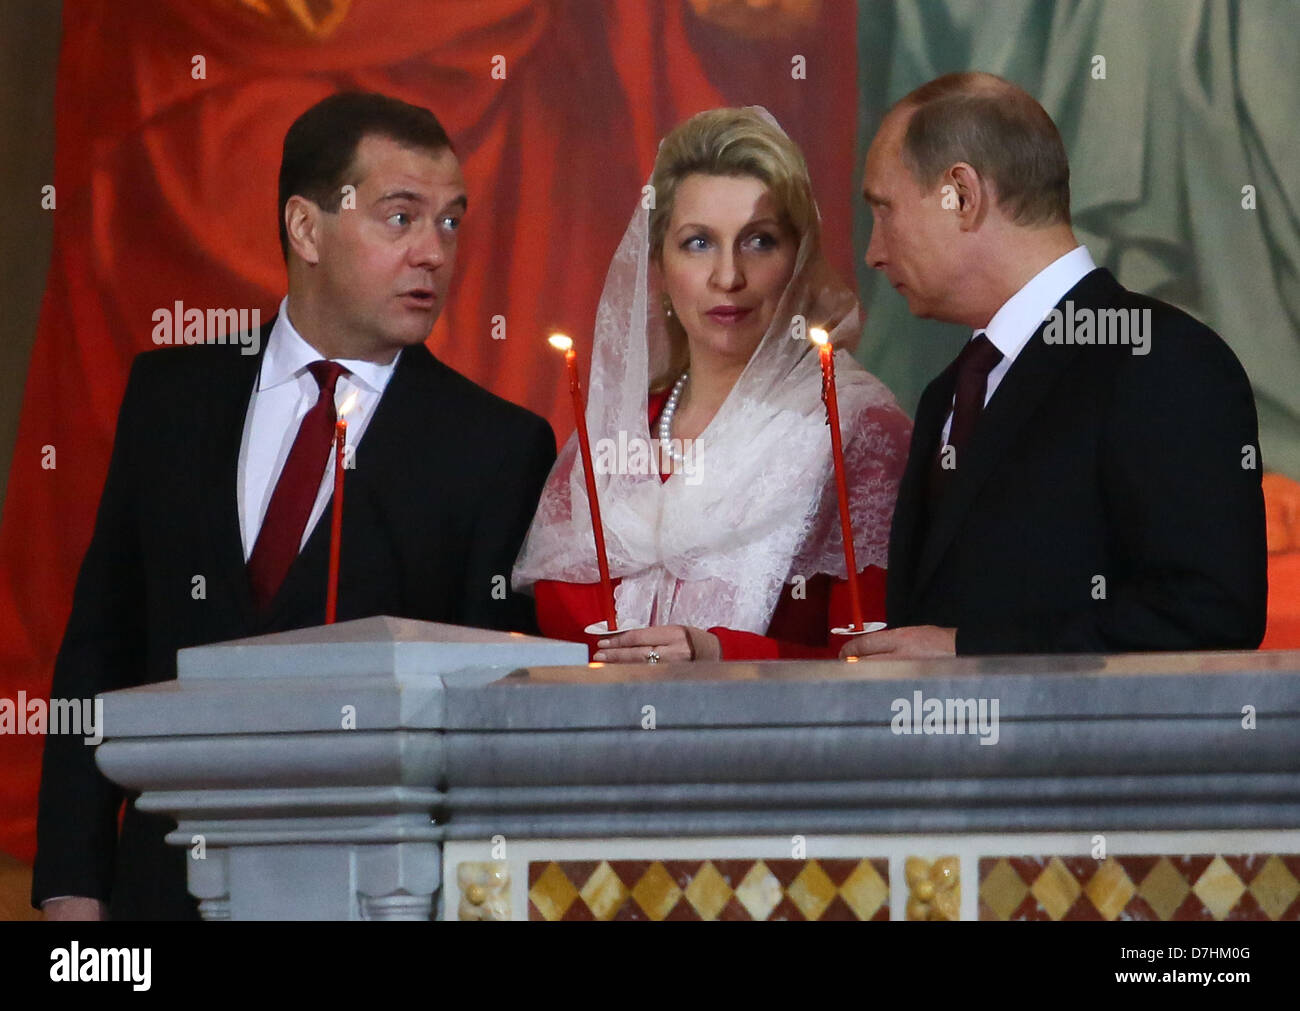 May 5, 2013 - Moscow, Russia - May 05,2013. Pictured: l-r Russia's Prime Minister Dmitry Medvedev, Medvedev's spouse Svetlana Medvedeva and Russia's President Vladimir Putin attend Orthodox Easter church service in the Christ the Savior Cathedral of Moscow. (Credit Image: © PhotoXpress/ZUMAPRESS.com) Stock Photo